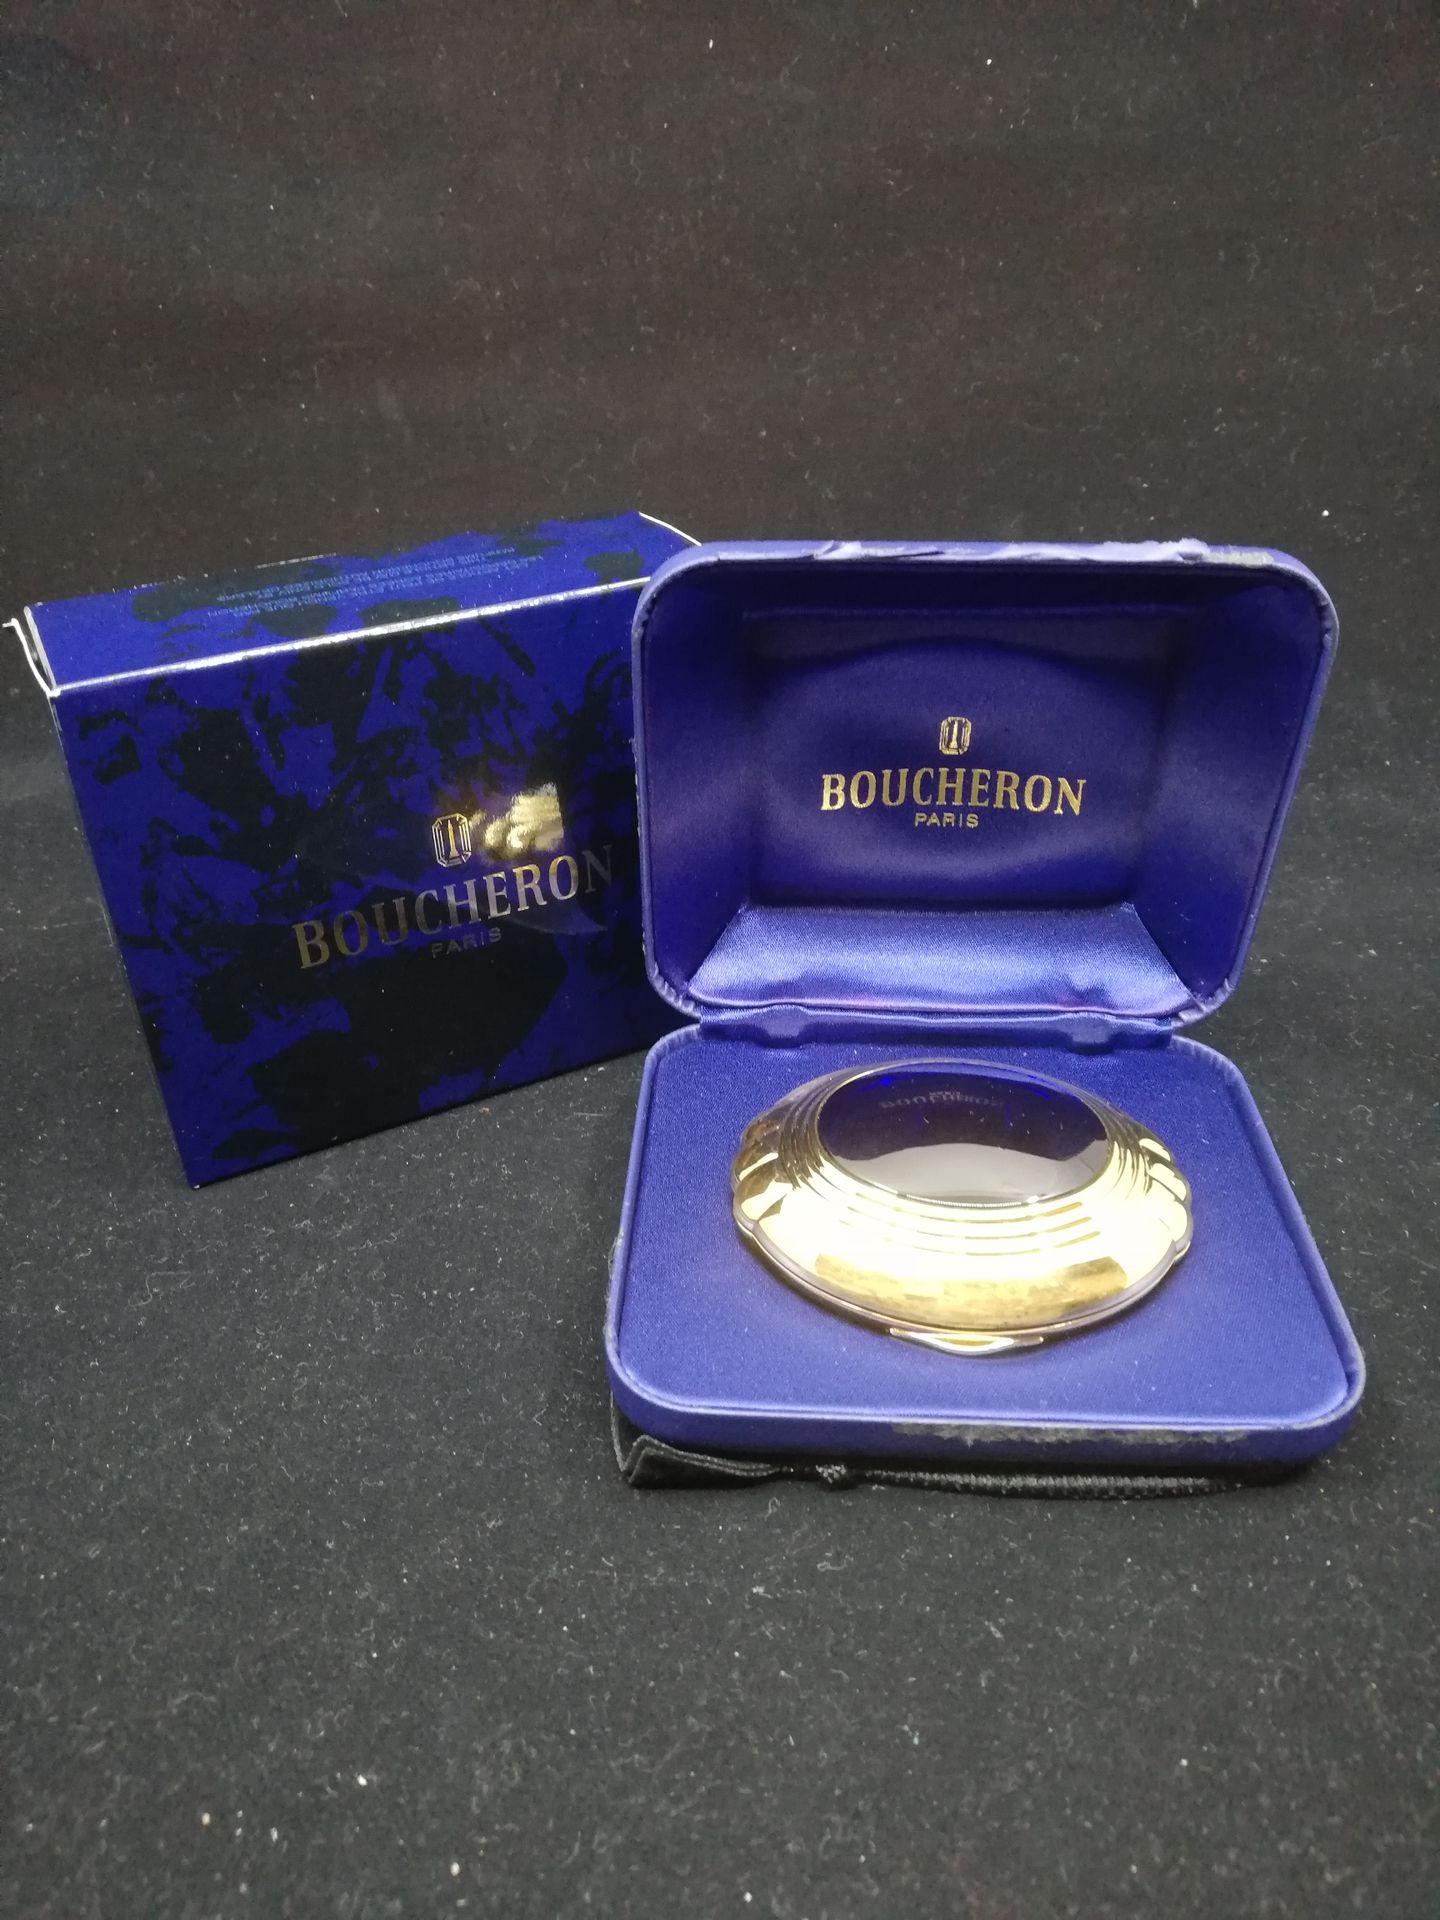 Null Boucheron - "Le Poudrier" - (1990s)

Presented in a navy blue cardboard cas&hellip;